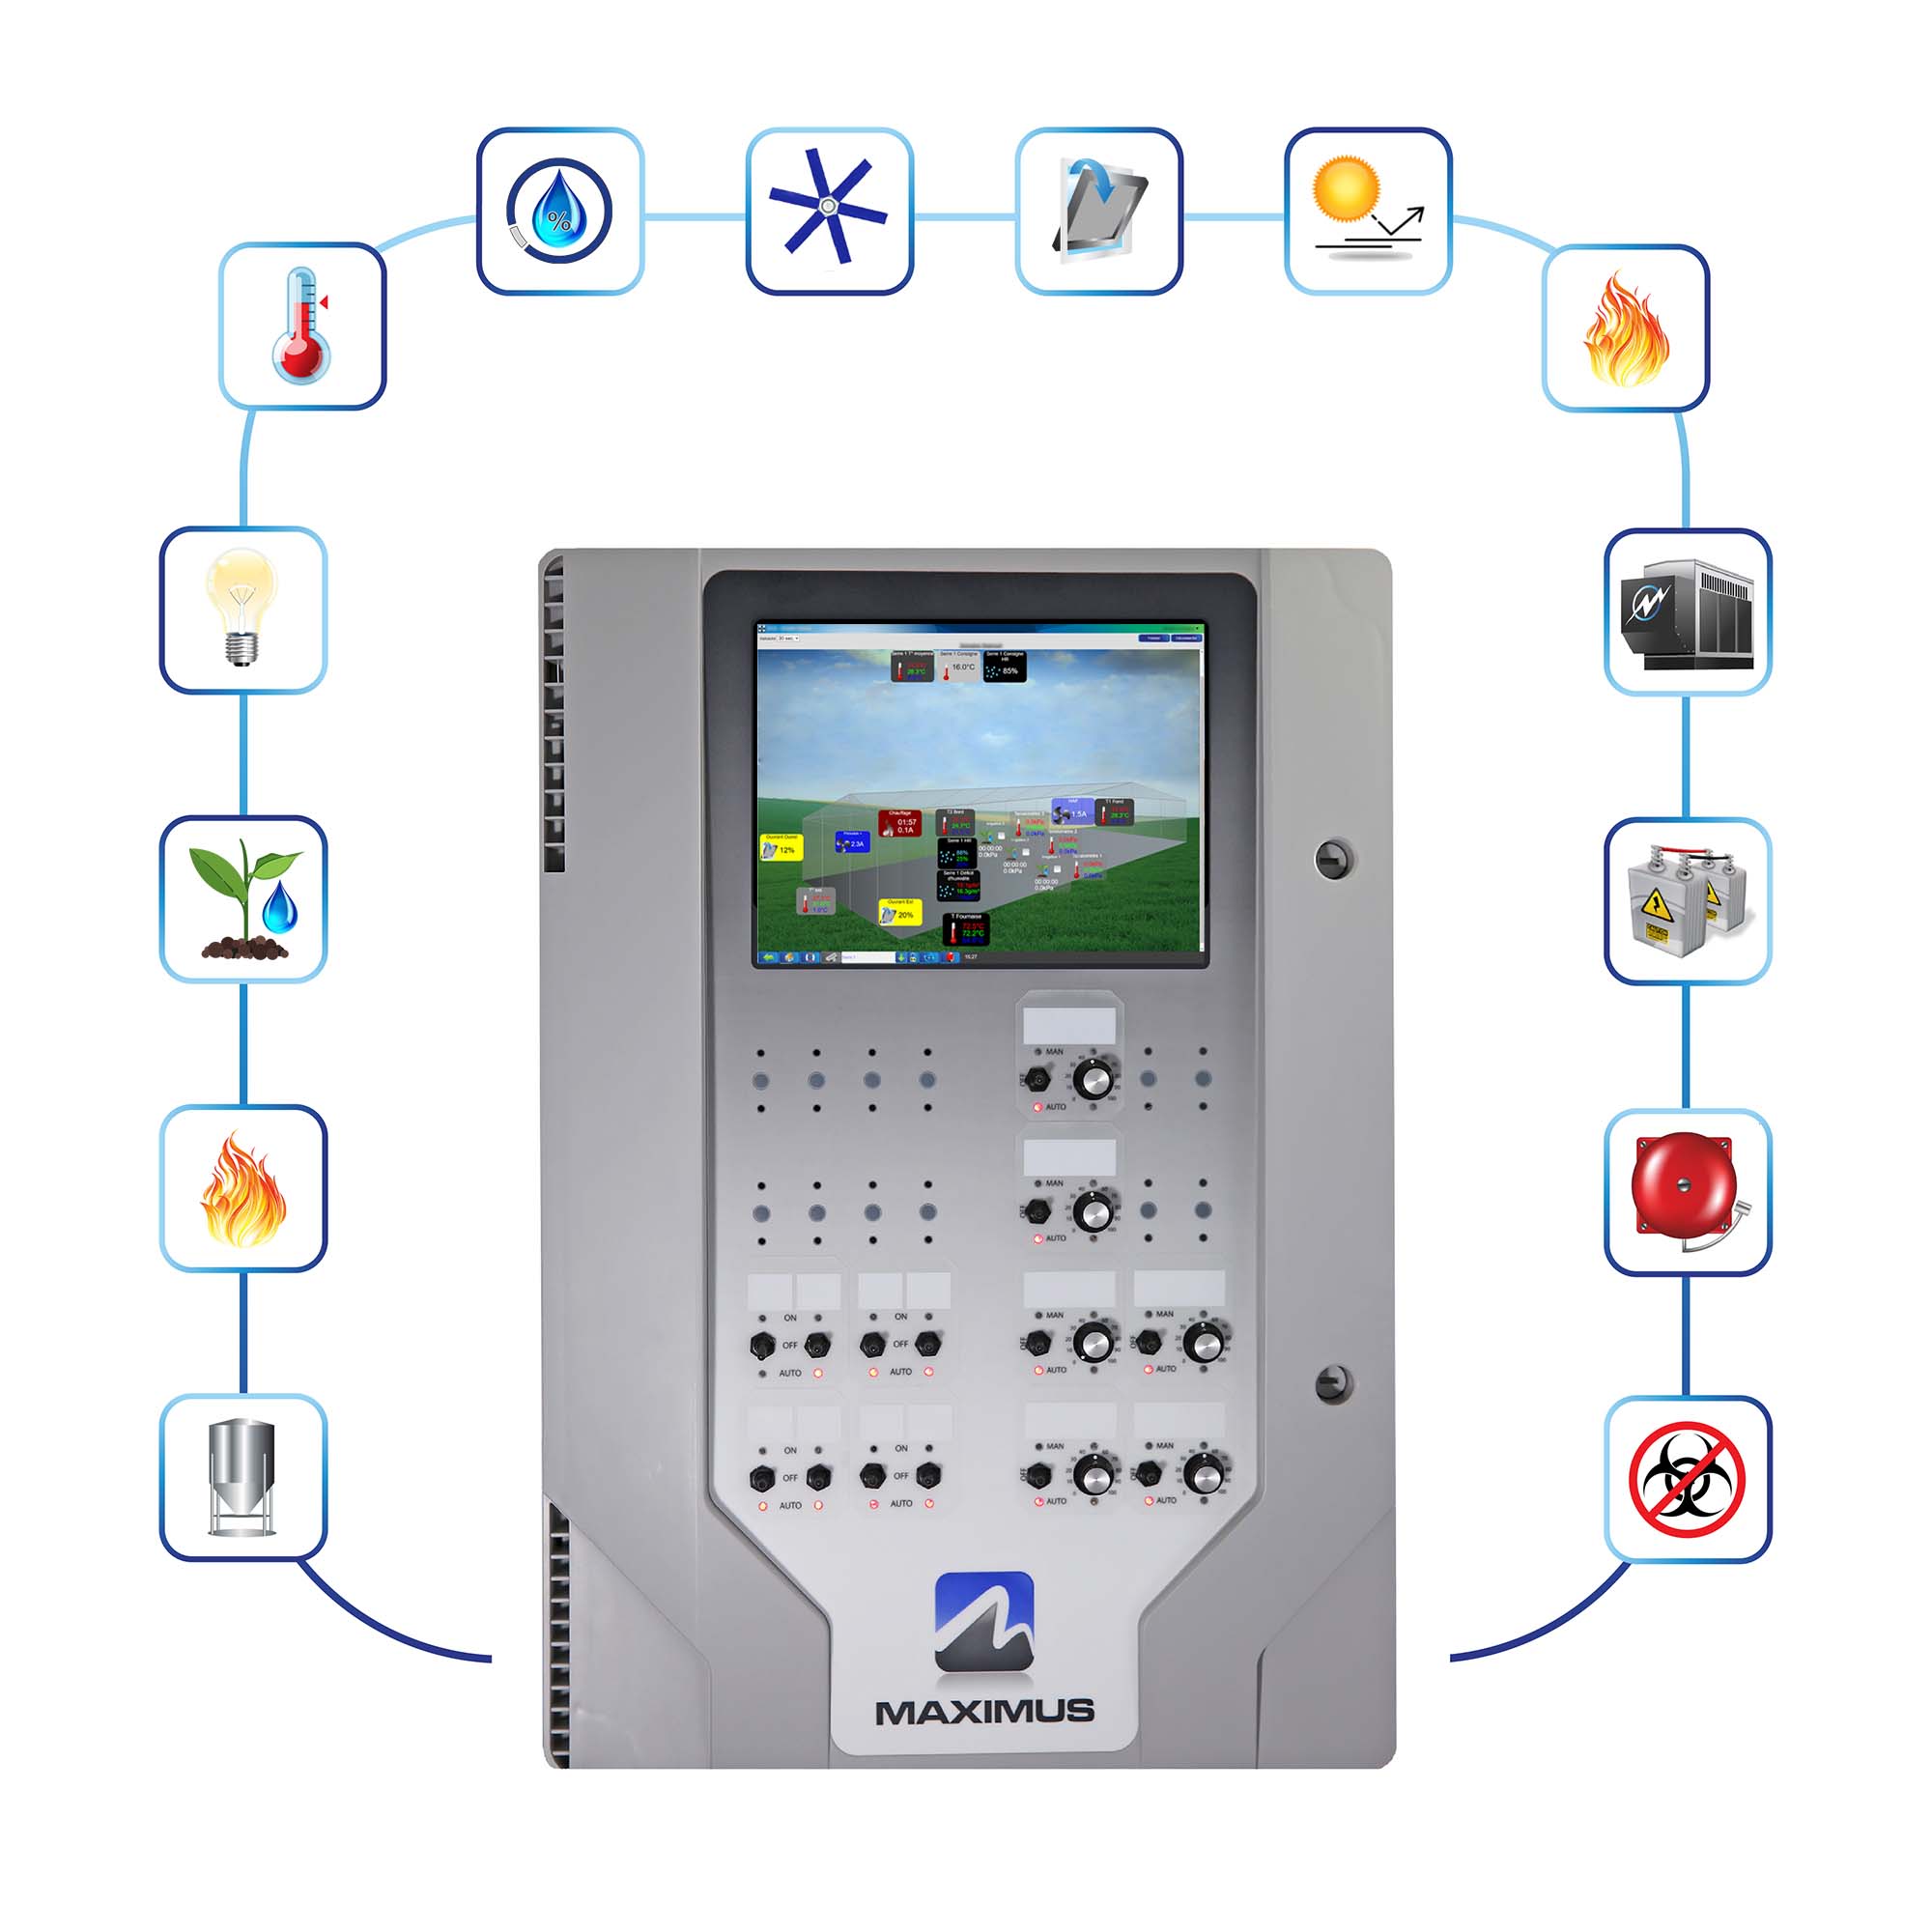 Maximus greenhouse controller icons